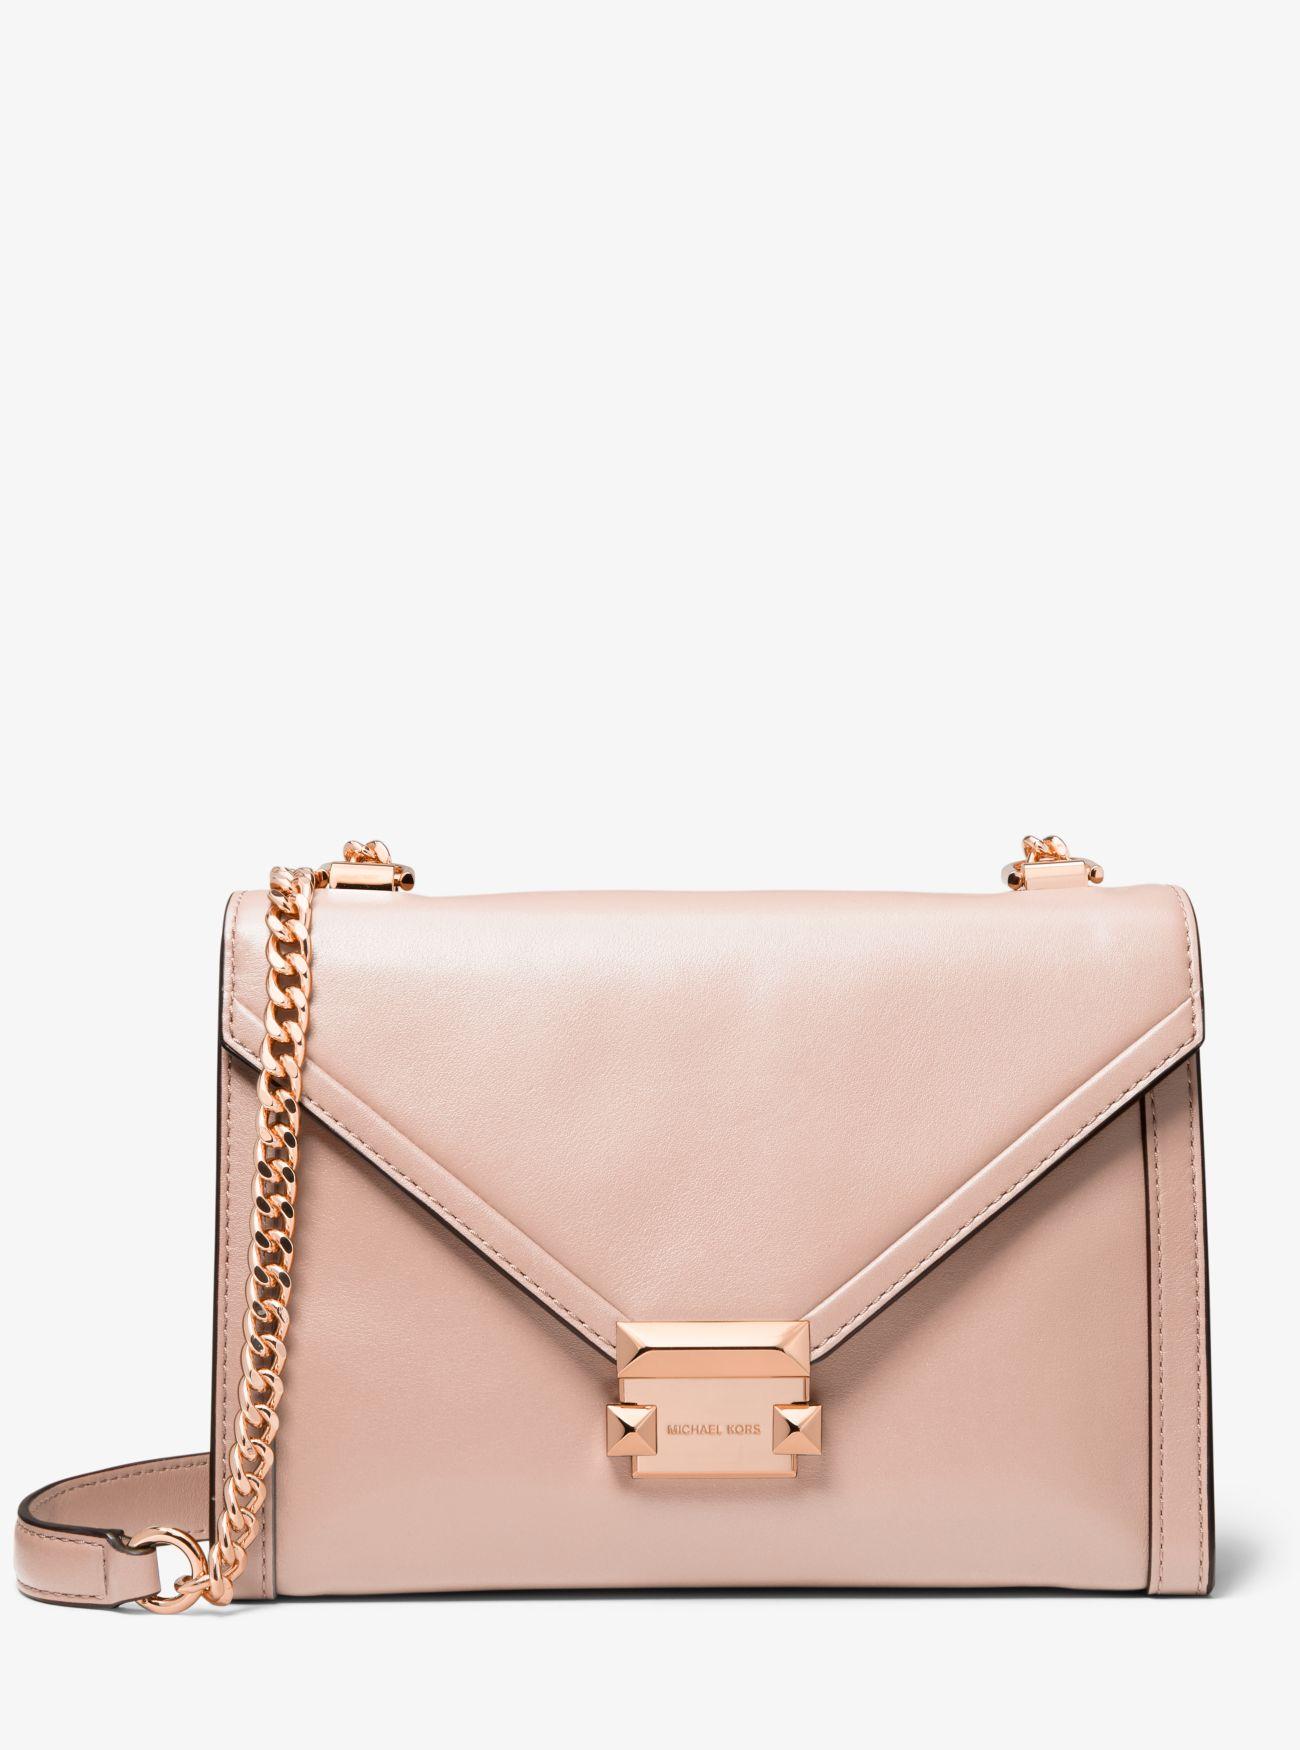 Michael Kors Whitney Large Leather Convertible Shoulder Bag in Soft Pink (Pink) - Lyst